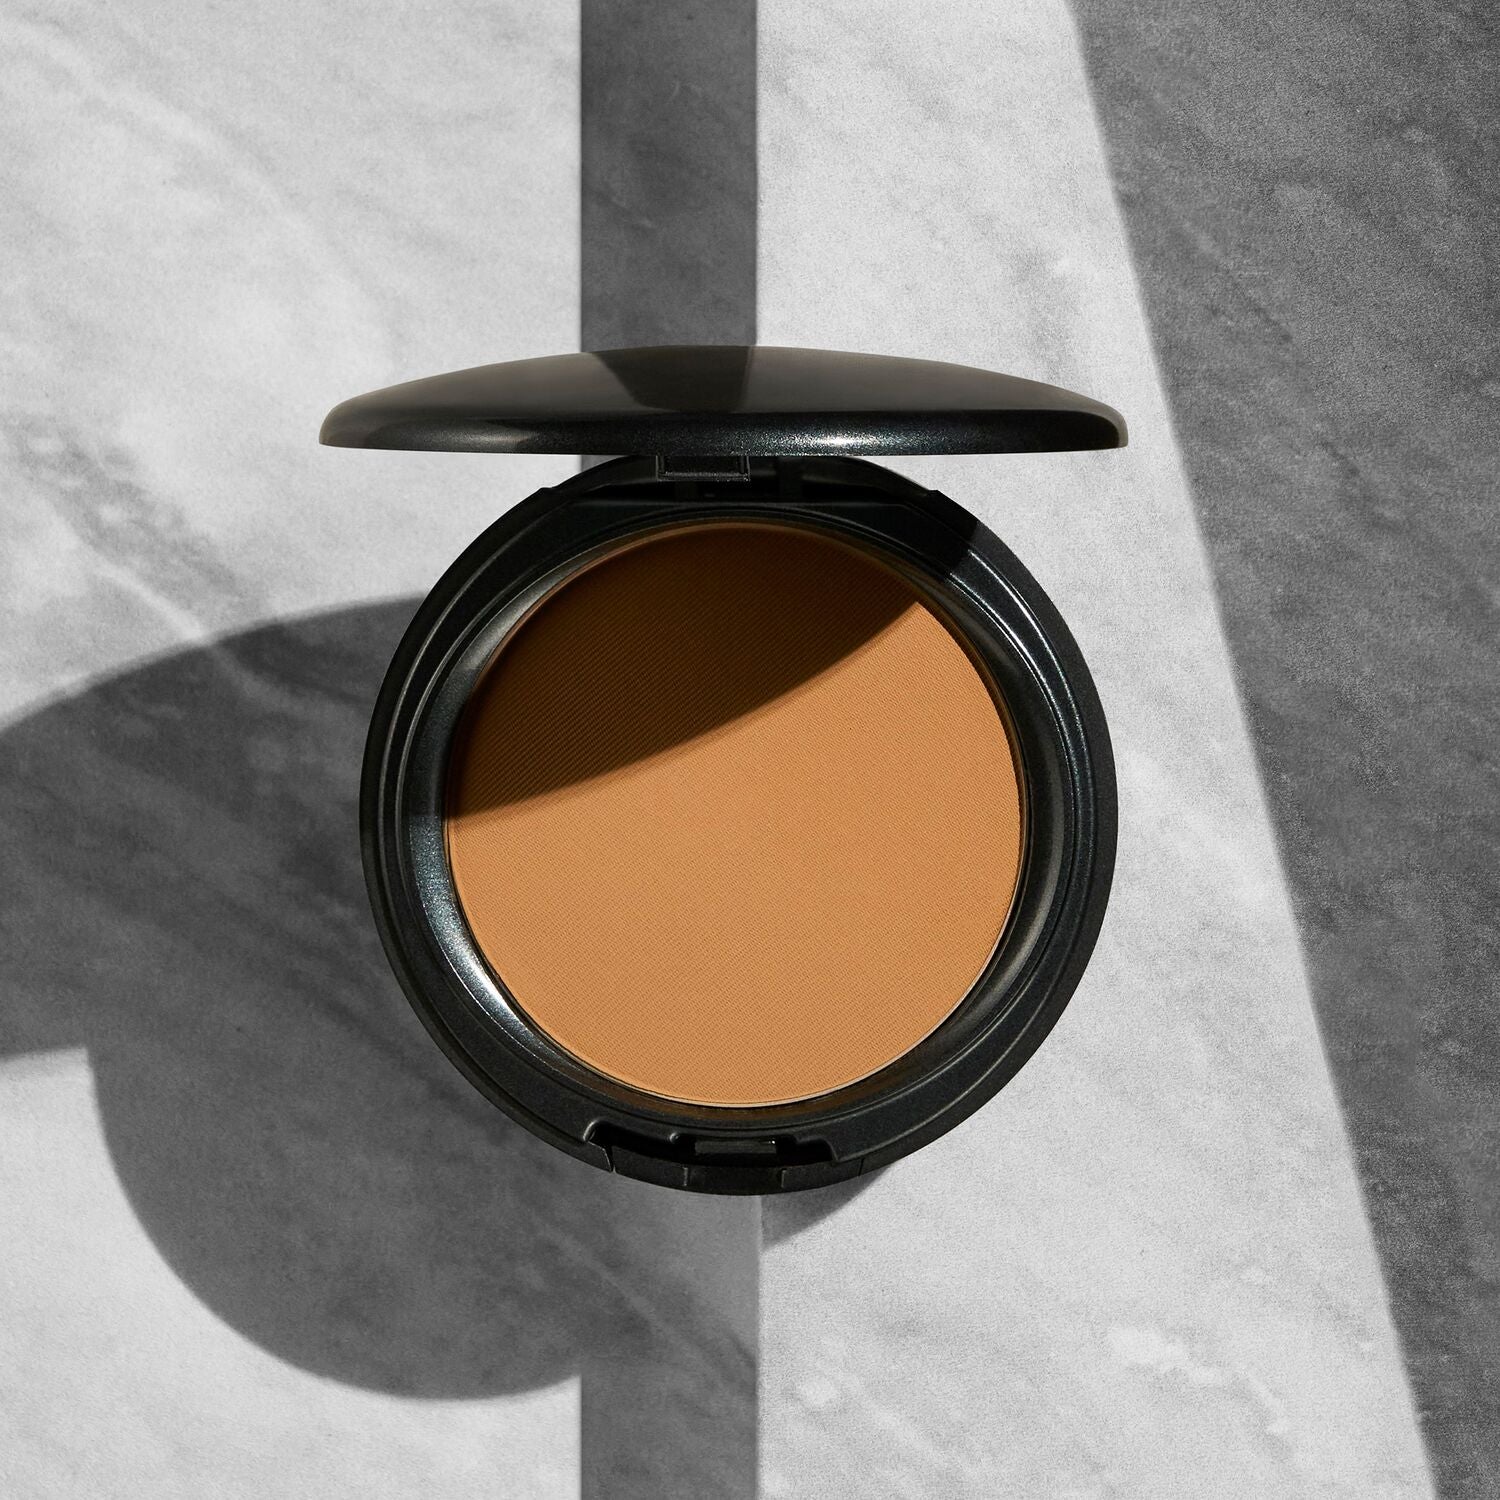 Coverfx Pressed Mineral Foundation in shade T3